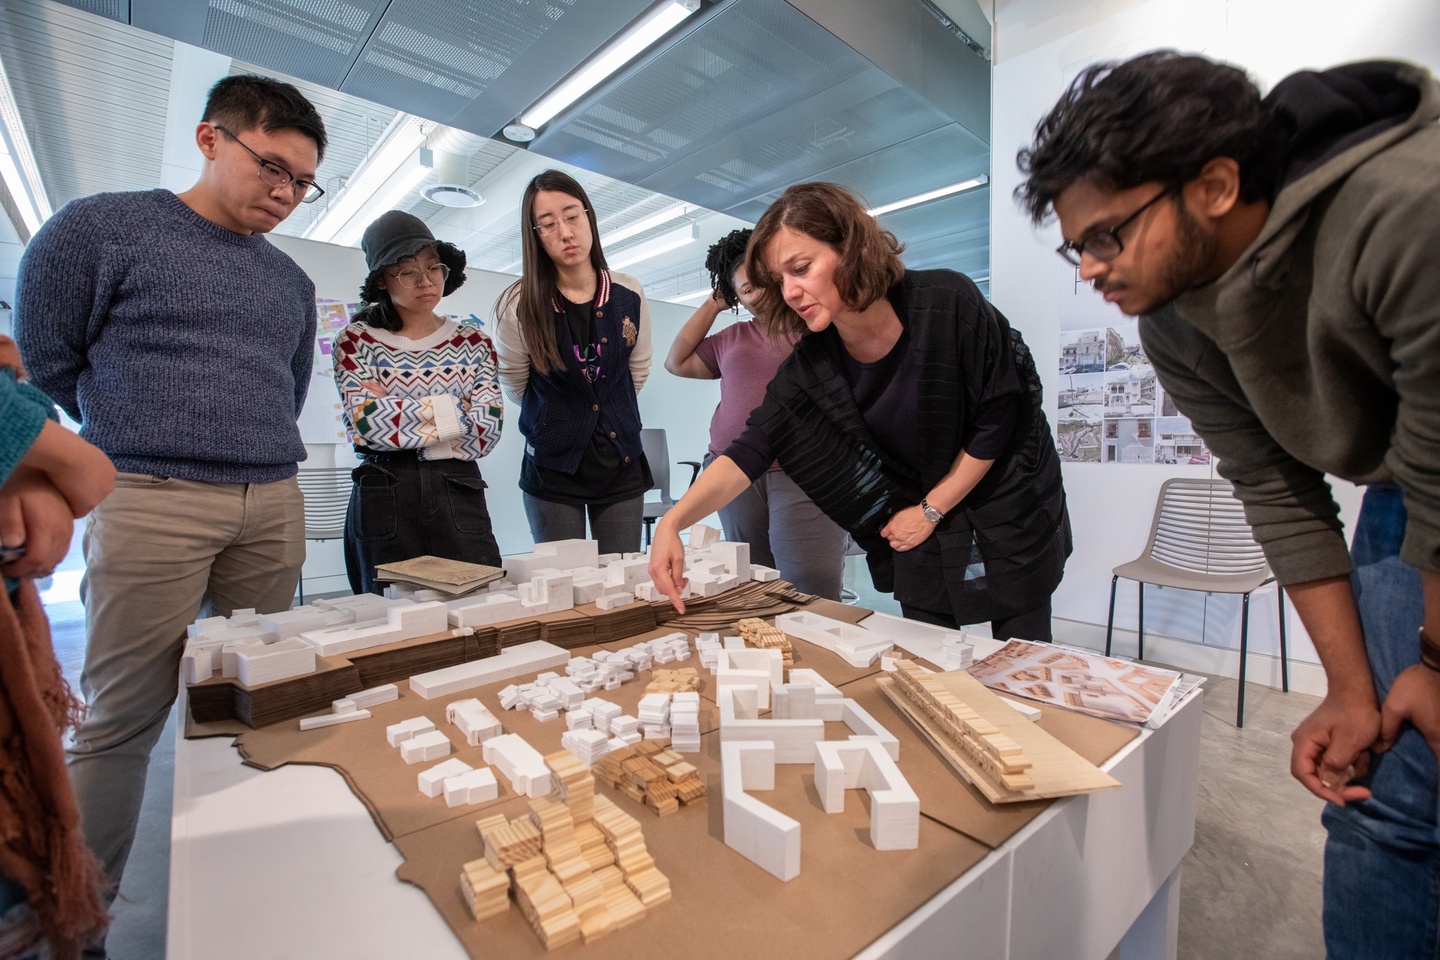 Group of people stand around a physical model of a city block on a plinth discussing.